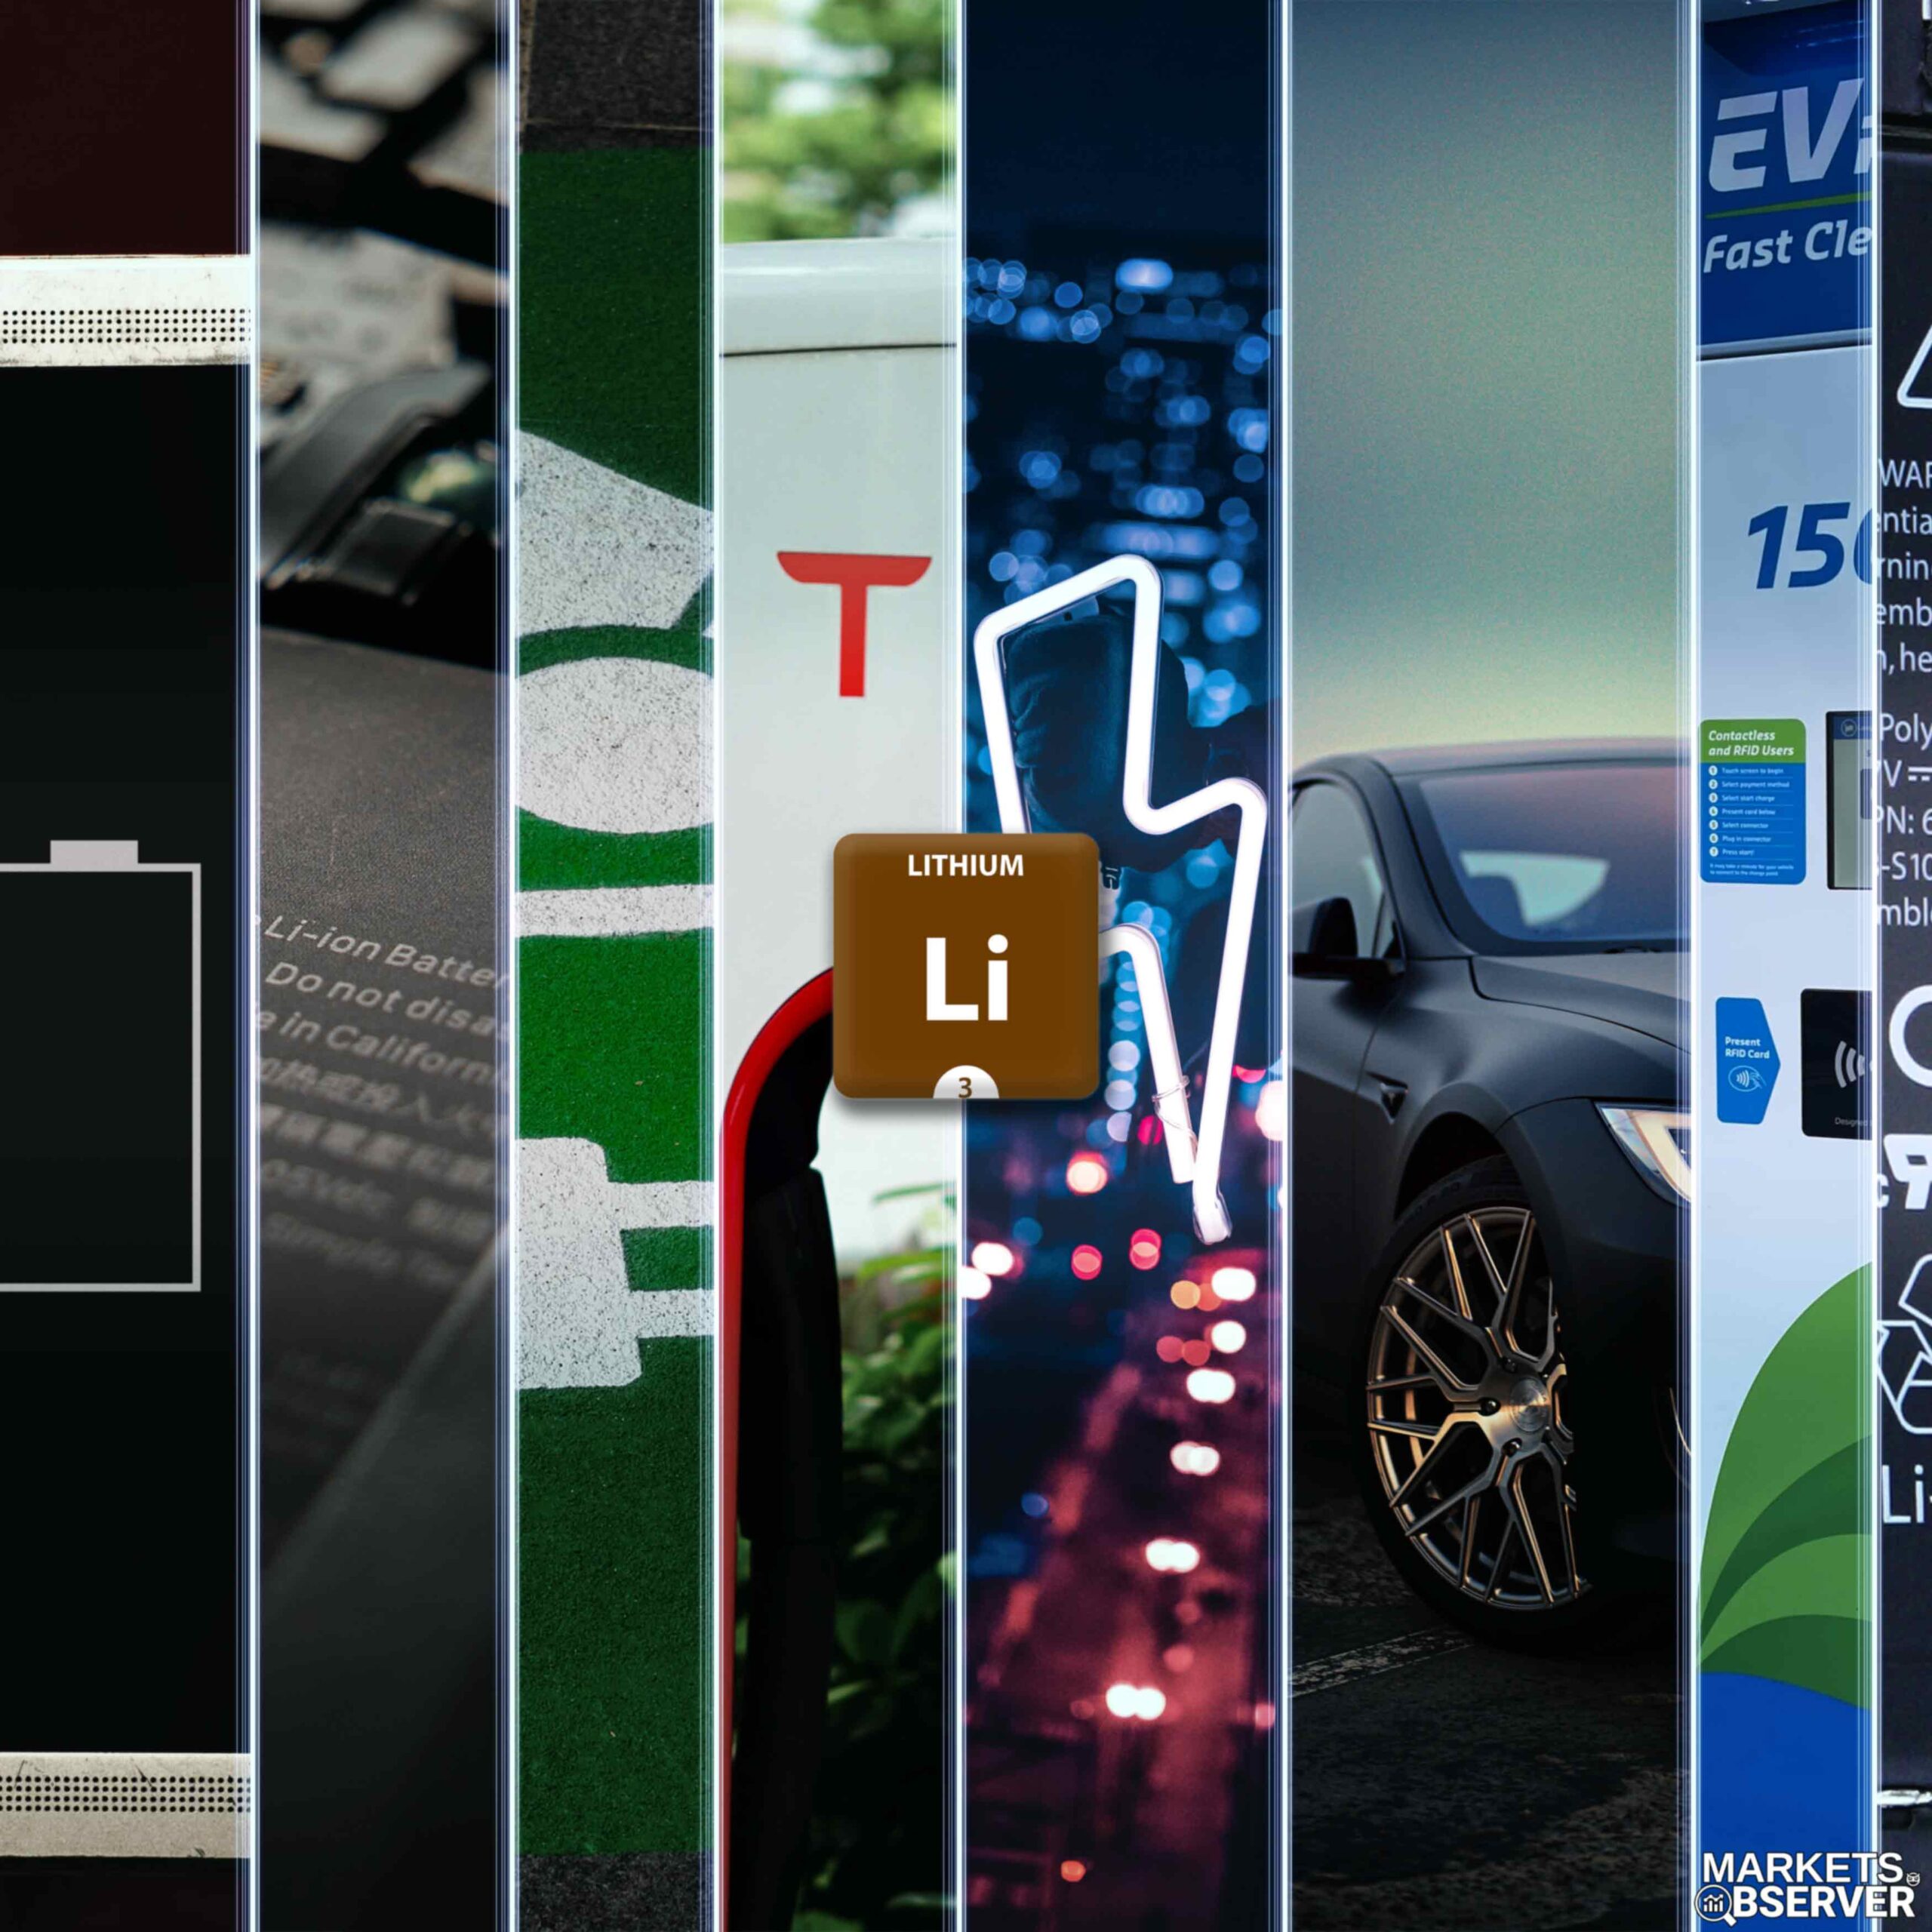 Lithium banner image showing Lithium periodic element tile plus various applications of Lithium -in Lithium-ion batteries in mobiles, electronics and electric vehicles.